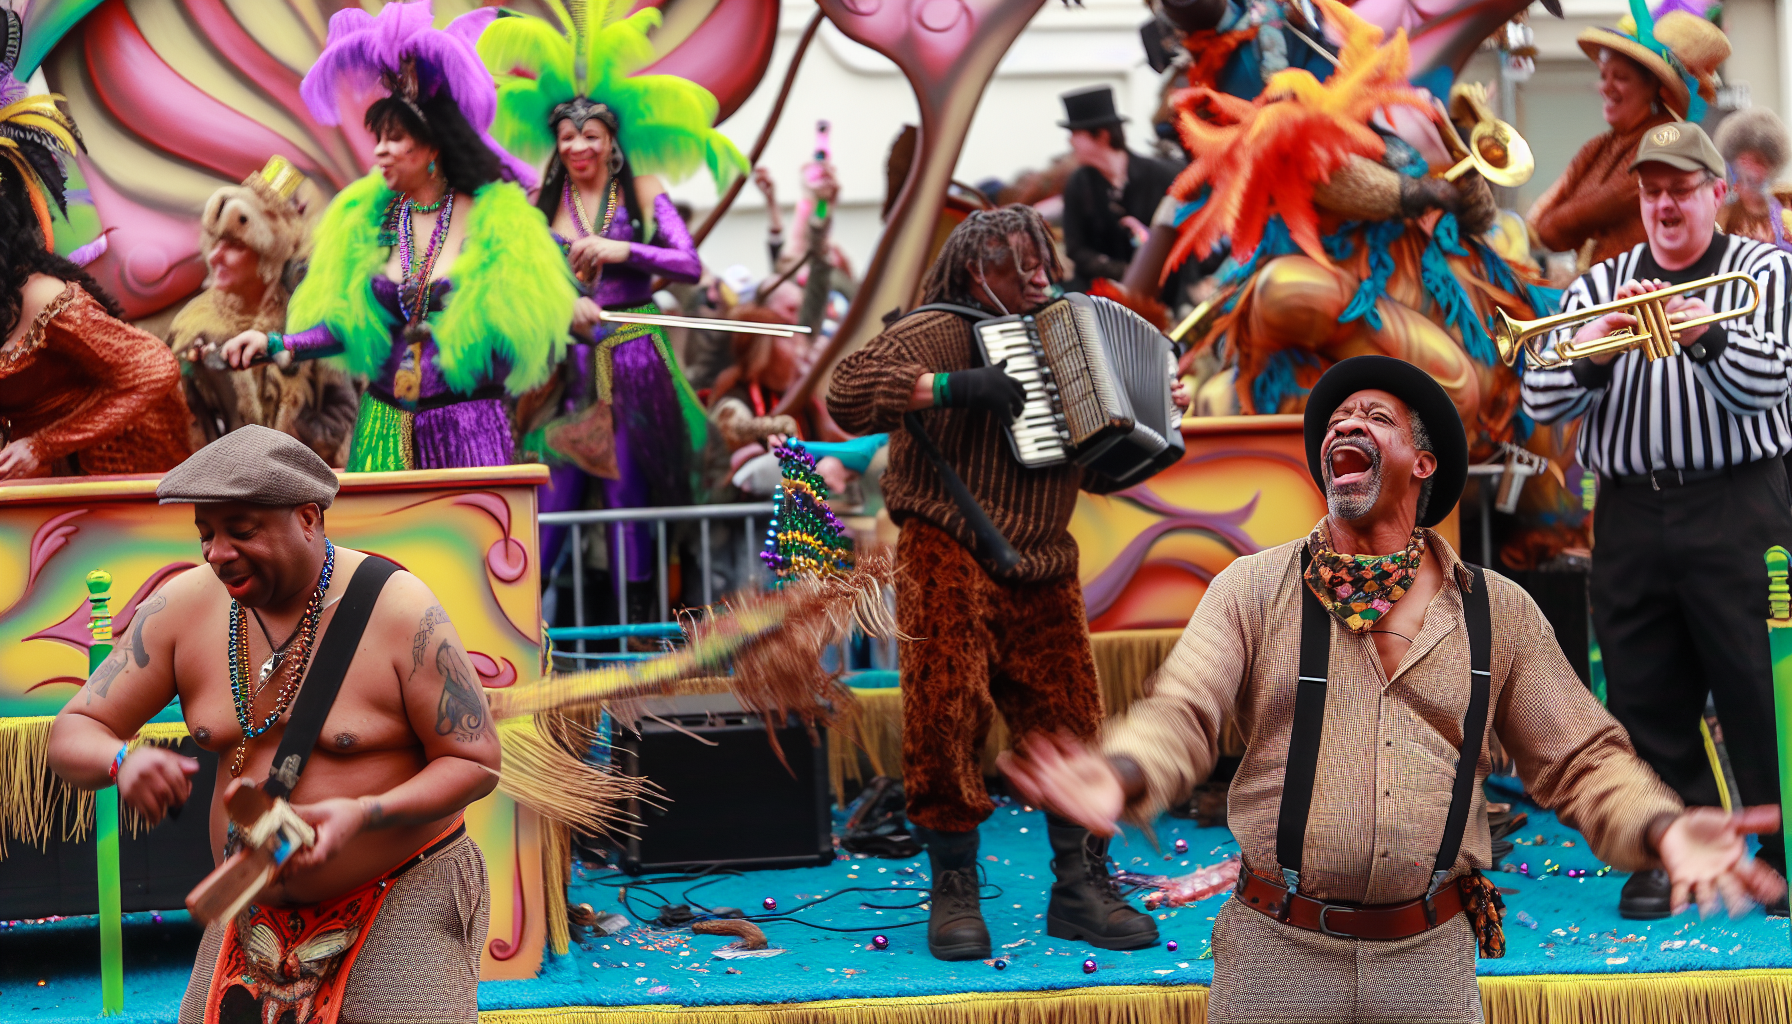 Colorful Mardi Gras parade with vibrant Zydeco and Cajun music performances